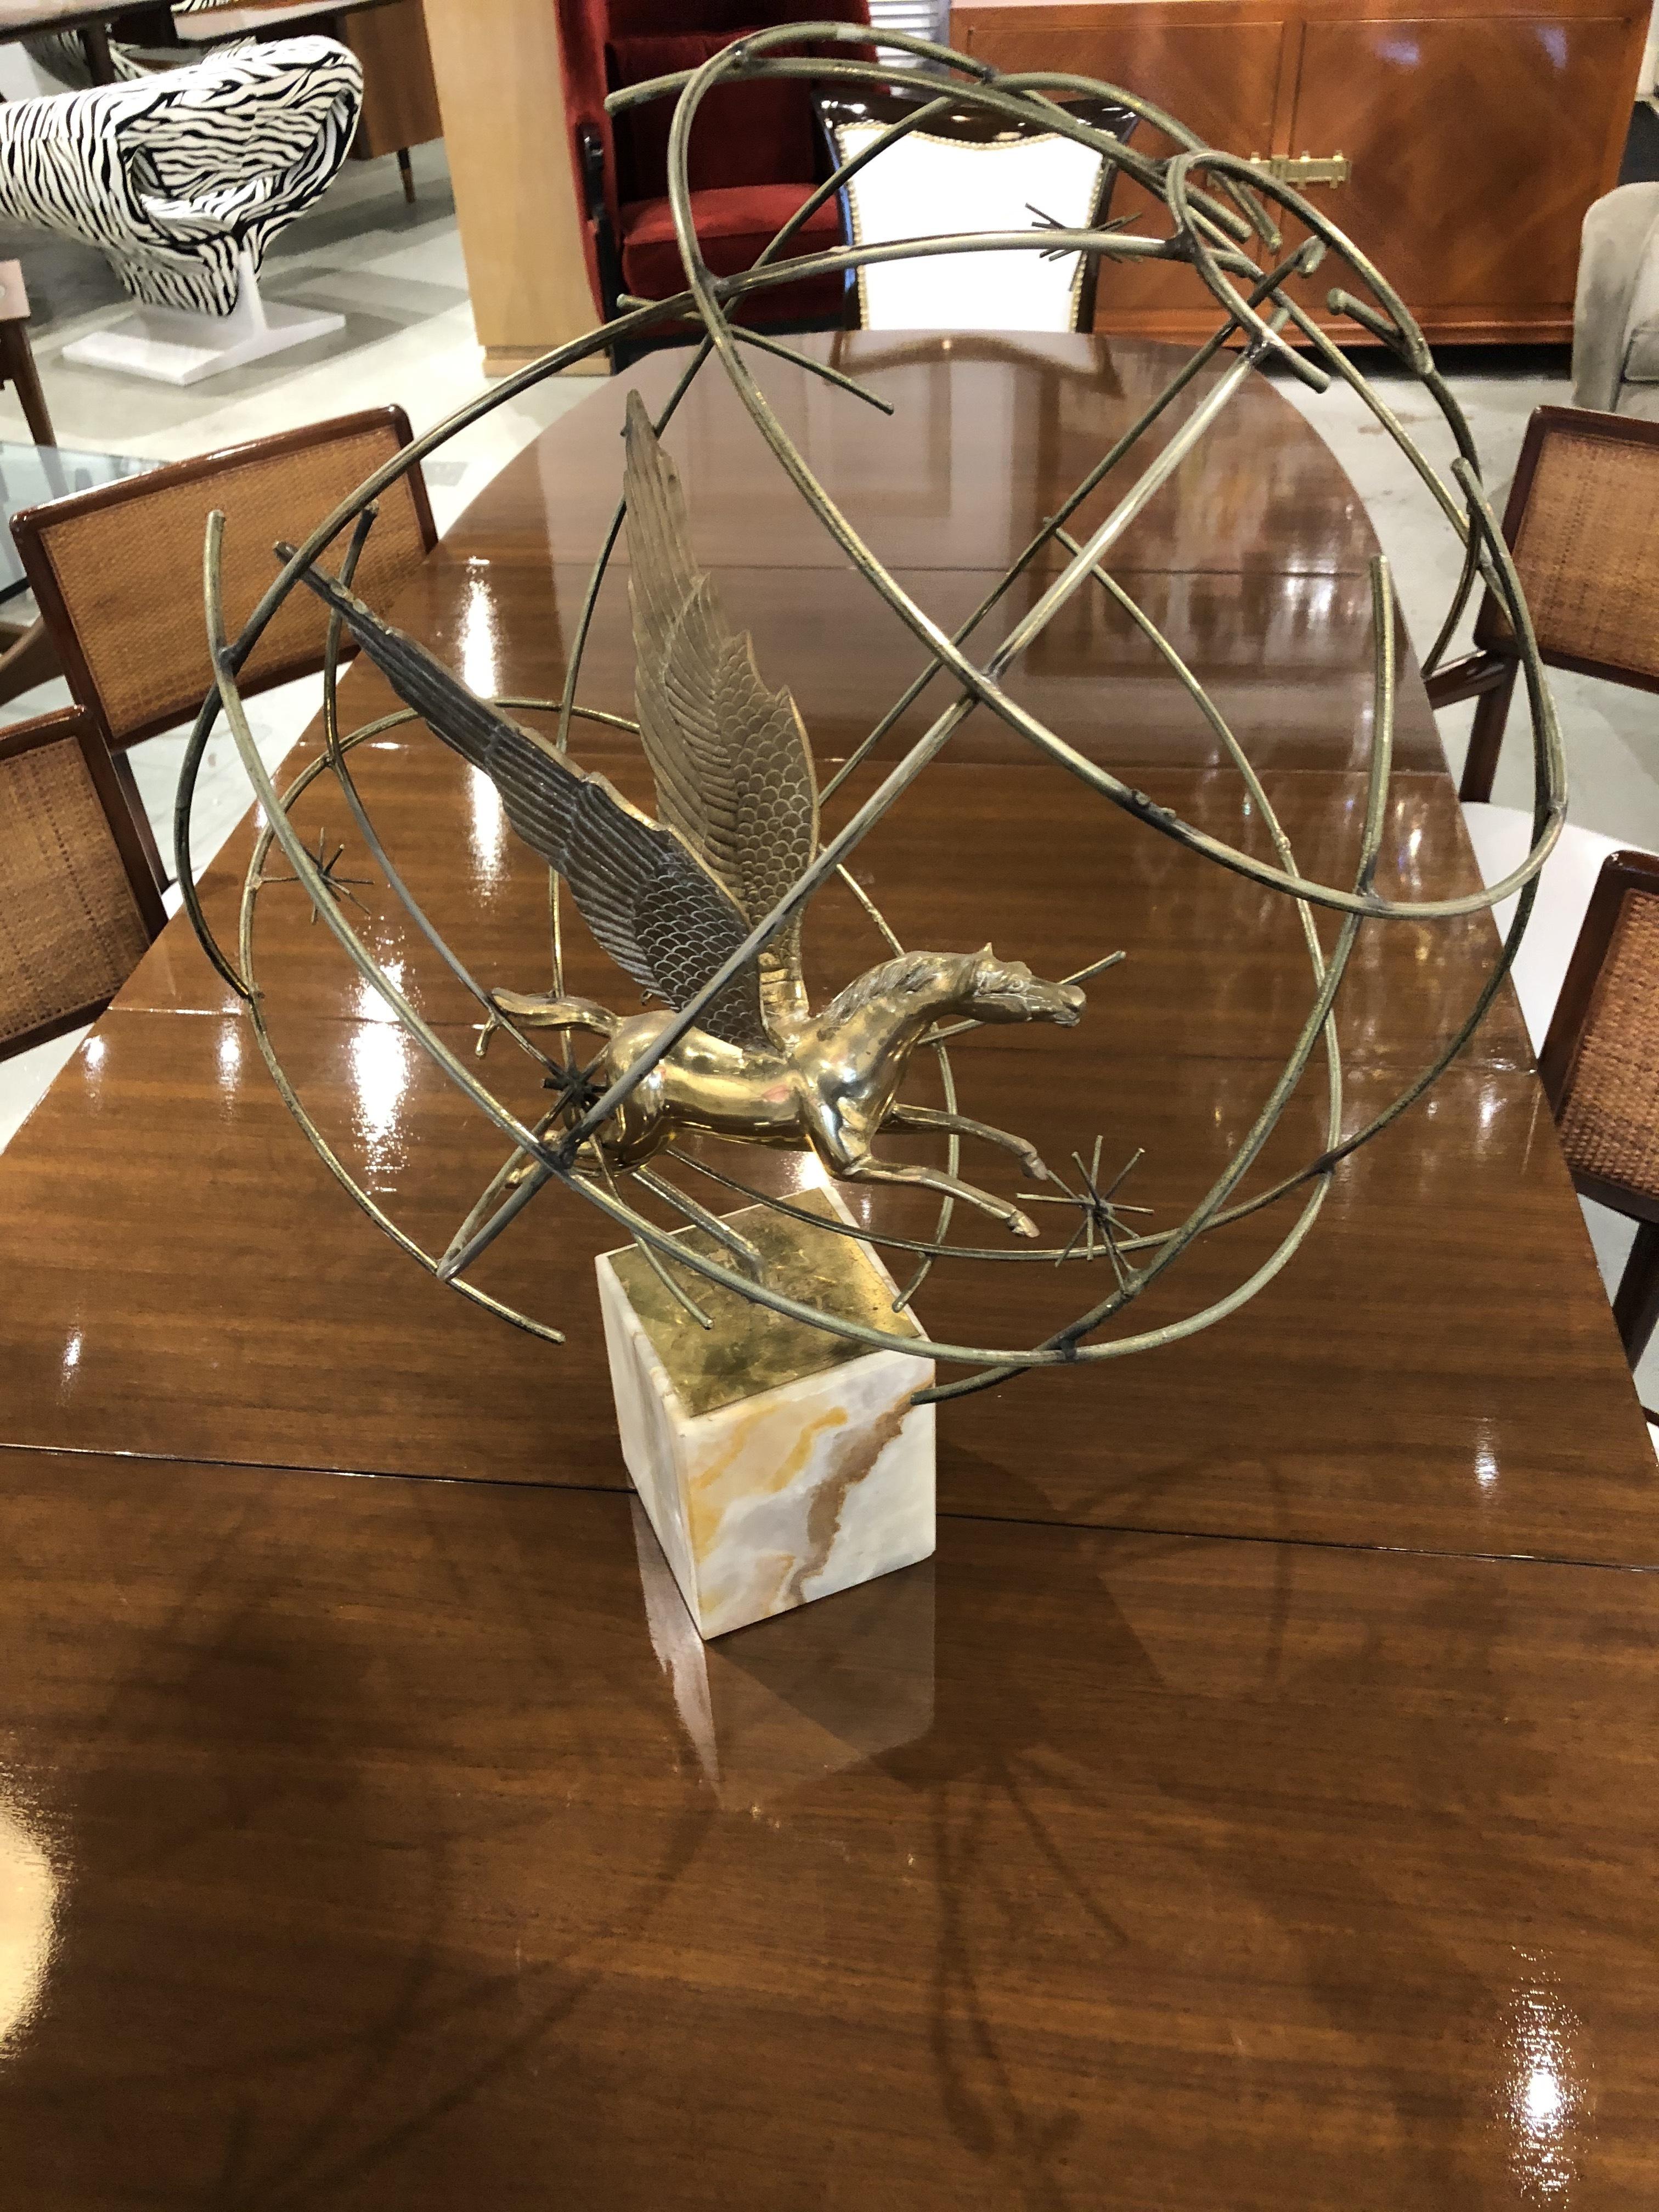 A very rare figurative sculpture of a pegasus, encircled by a globe. Only 10 of these were made. The globe has a very abstract feeling with small clusters of starbursts on the structure. the brass sculpture sits atop a square marble base.